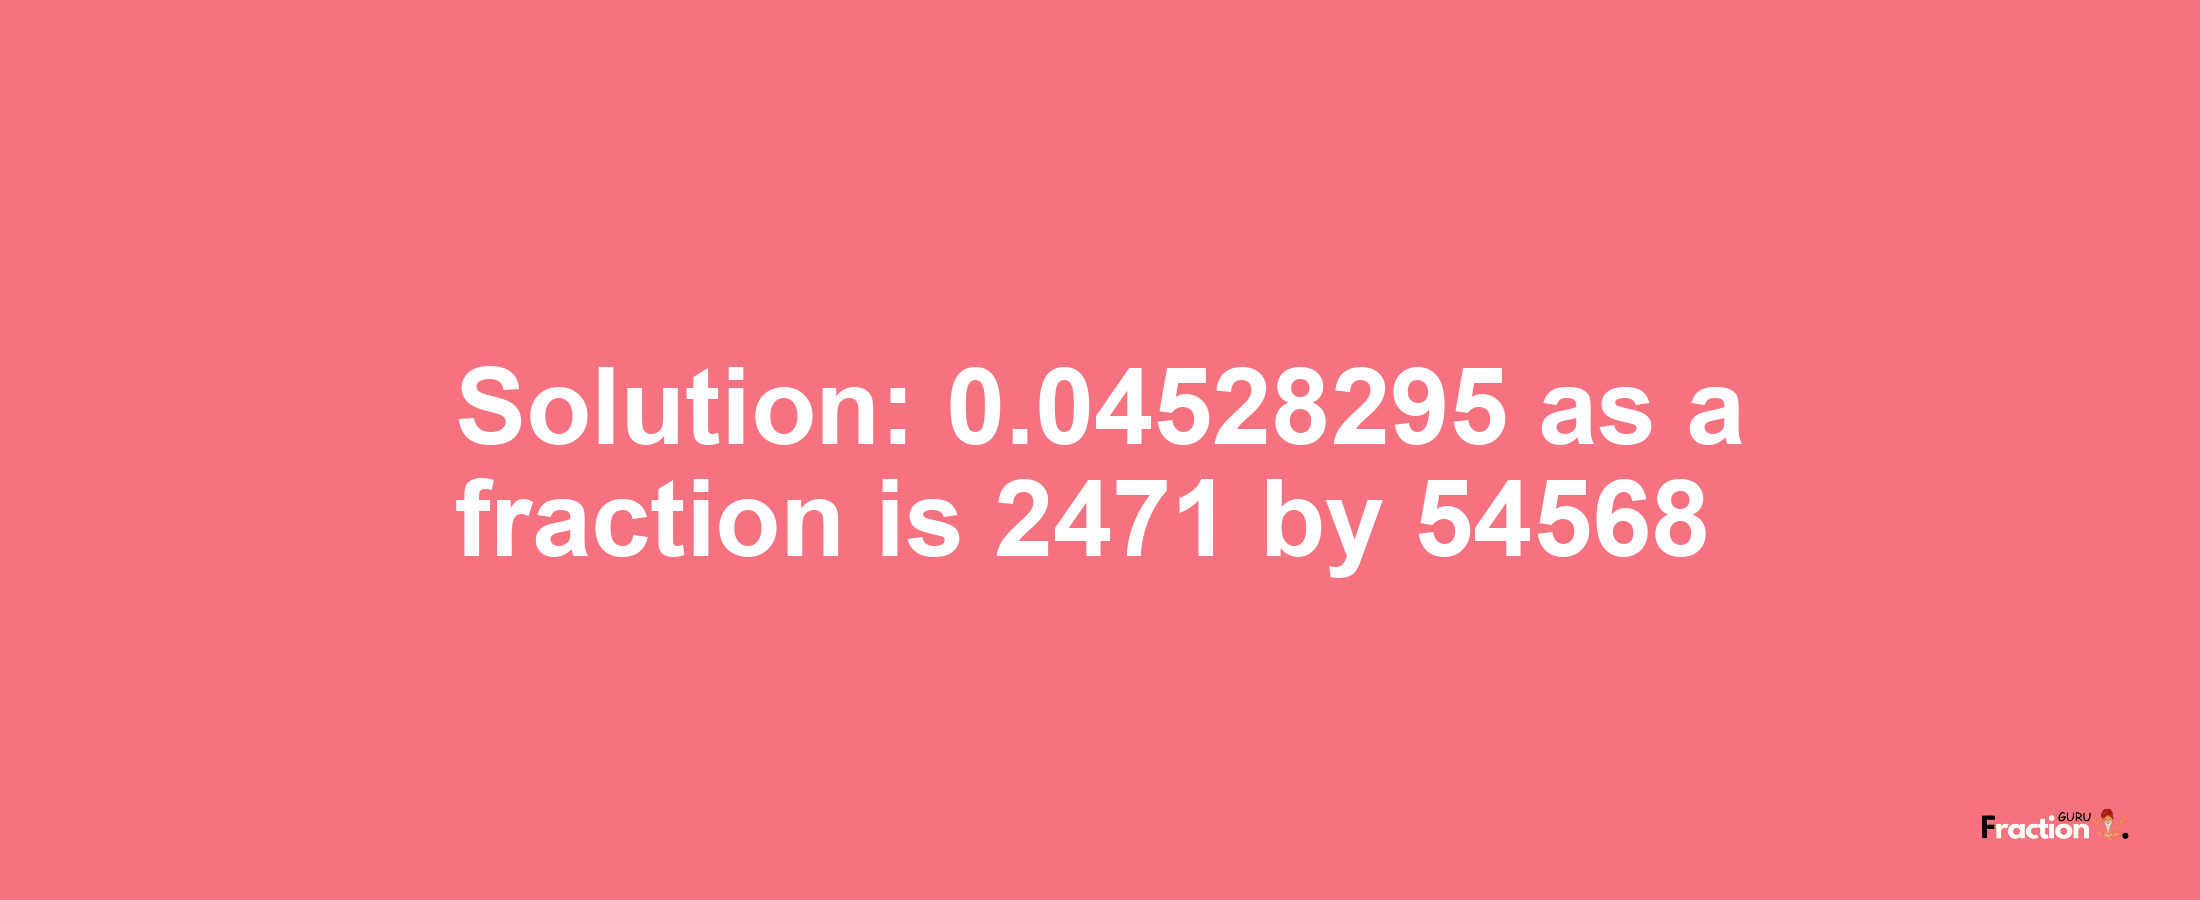 Solution:0.04528295 as a fraction is 2471/54568